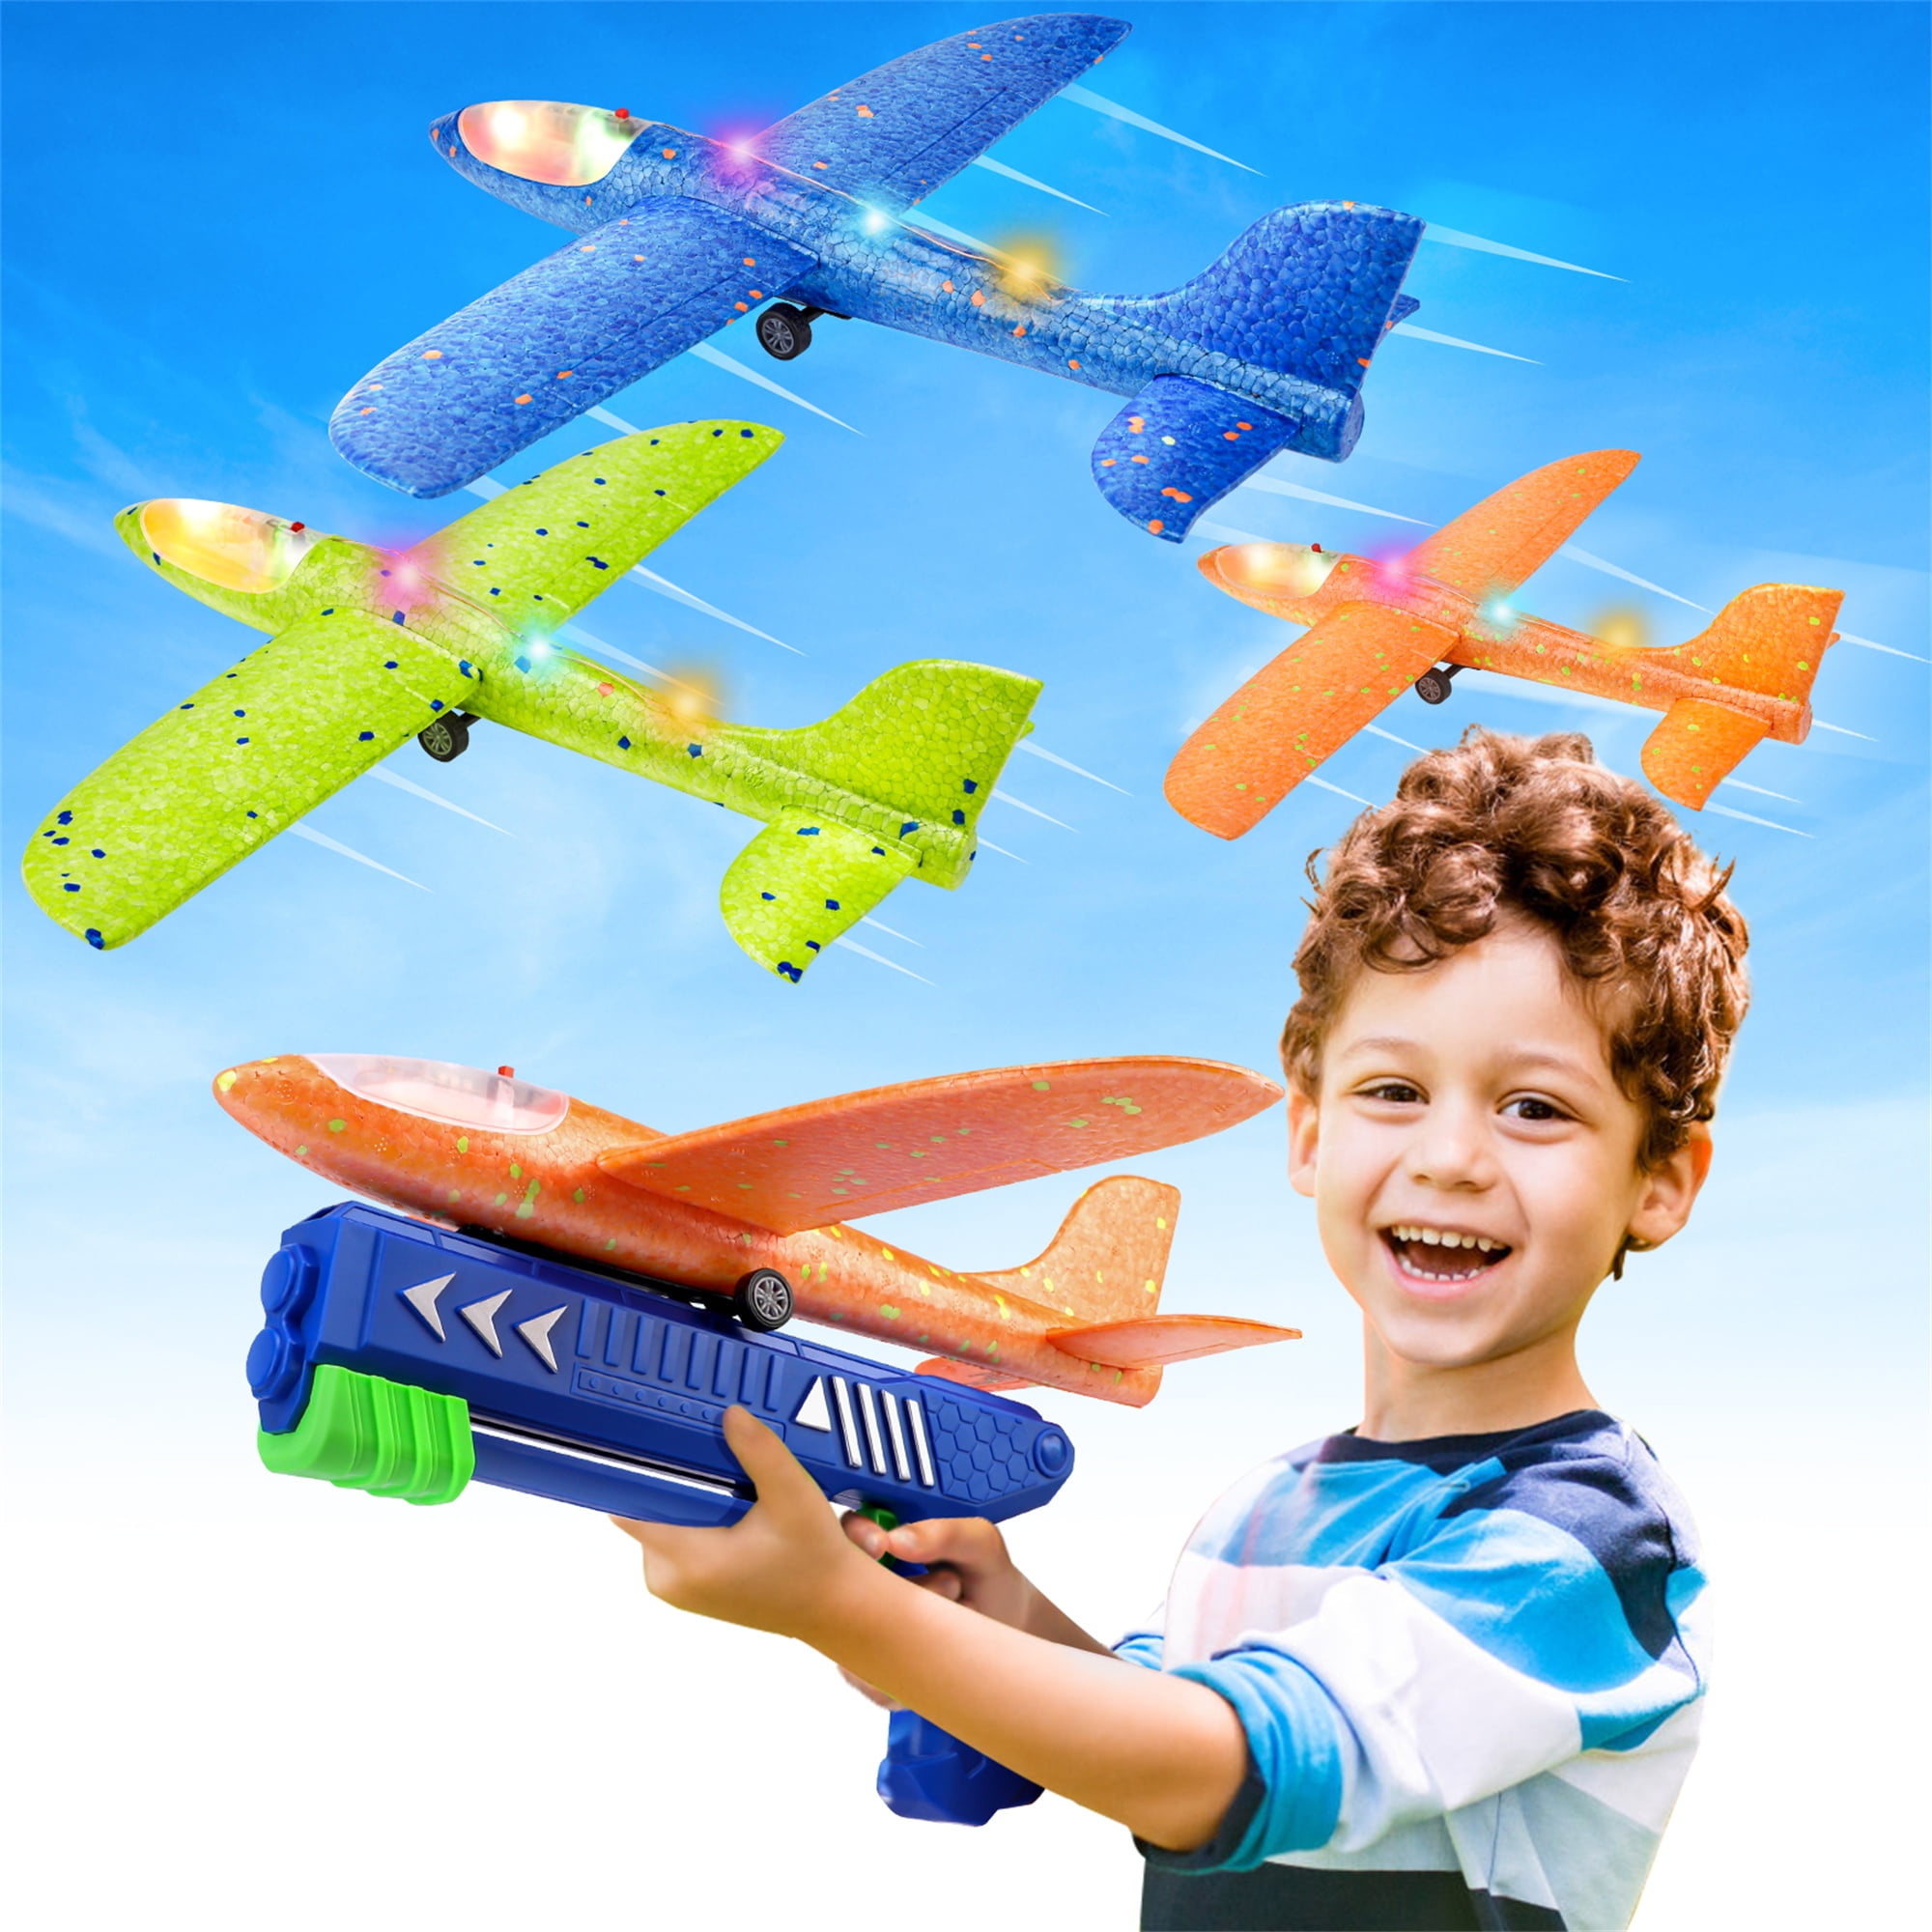 Growsly 3 Pack Airplane Launcher Toys, 12.6 inch Foam Glider LED Airplane, 2 Flight Modes Catapult Airplane Boy Toys Kids Outdoor Flying Toys Gifts 4